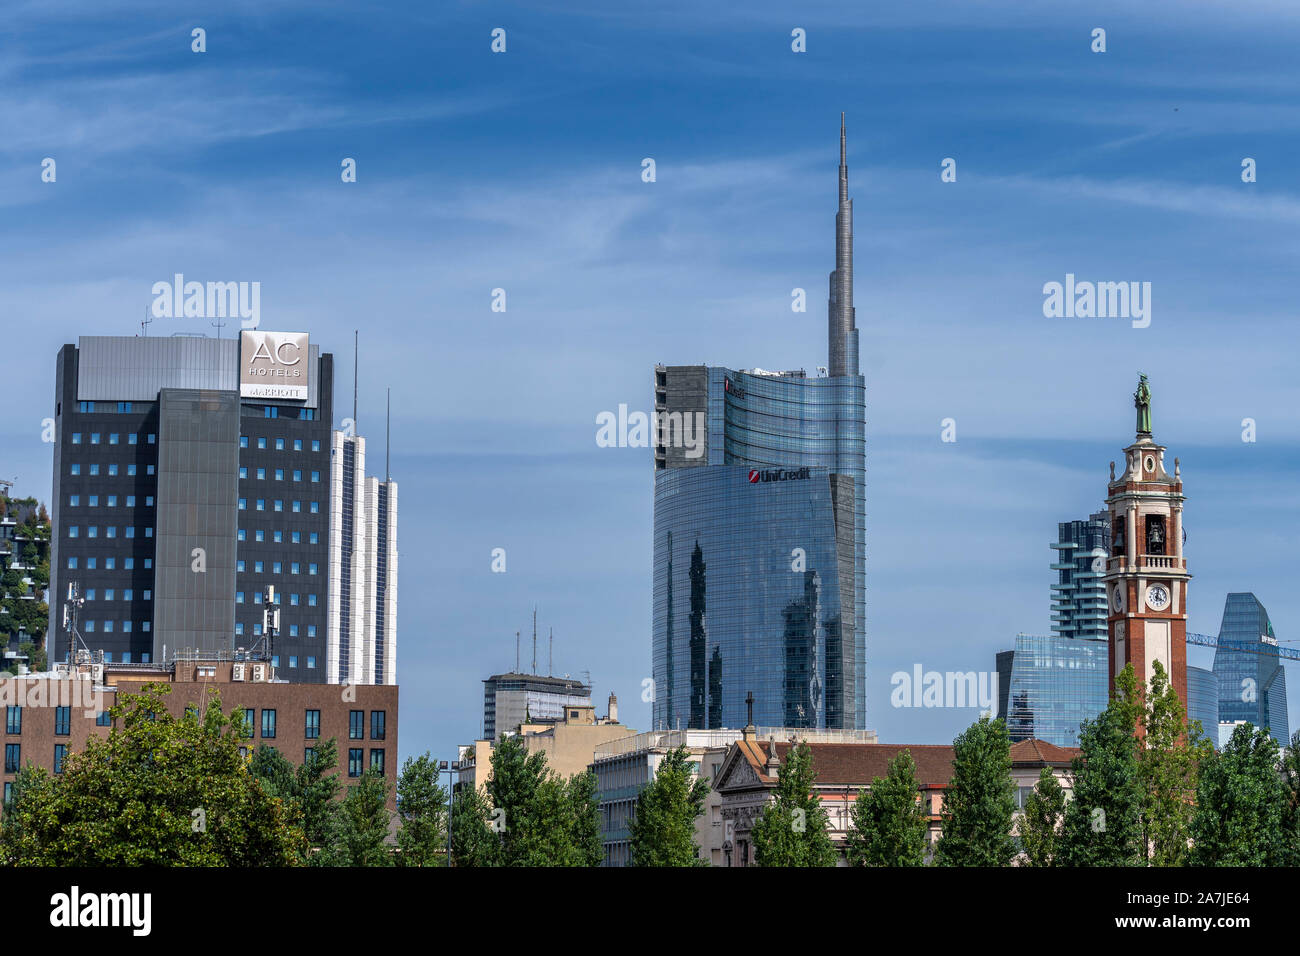 Skyline of Milan, Lombardy, italy, seen from the Cimitero Monumentale Stock Photo